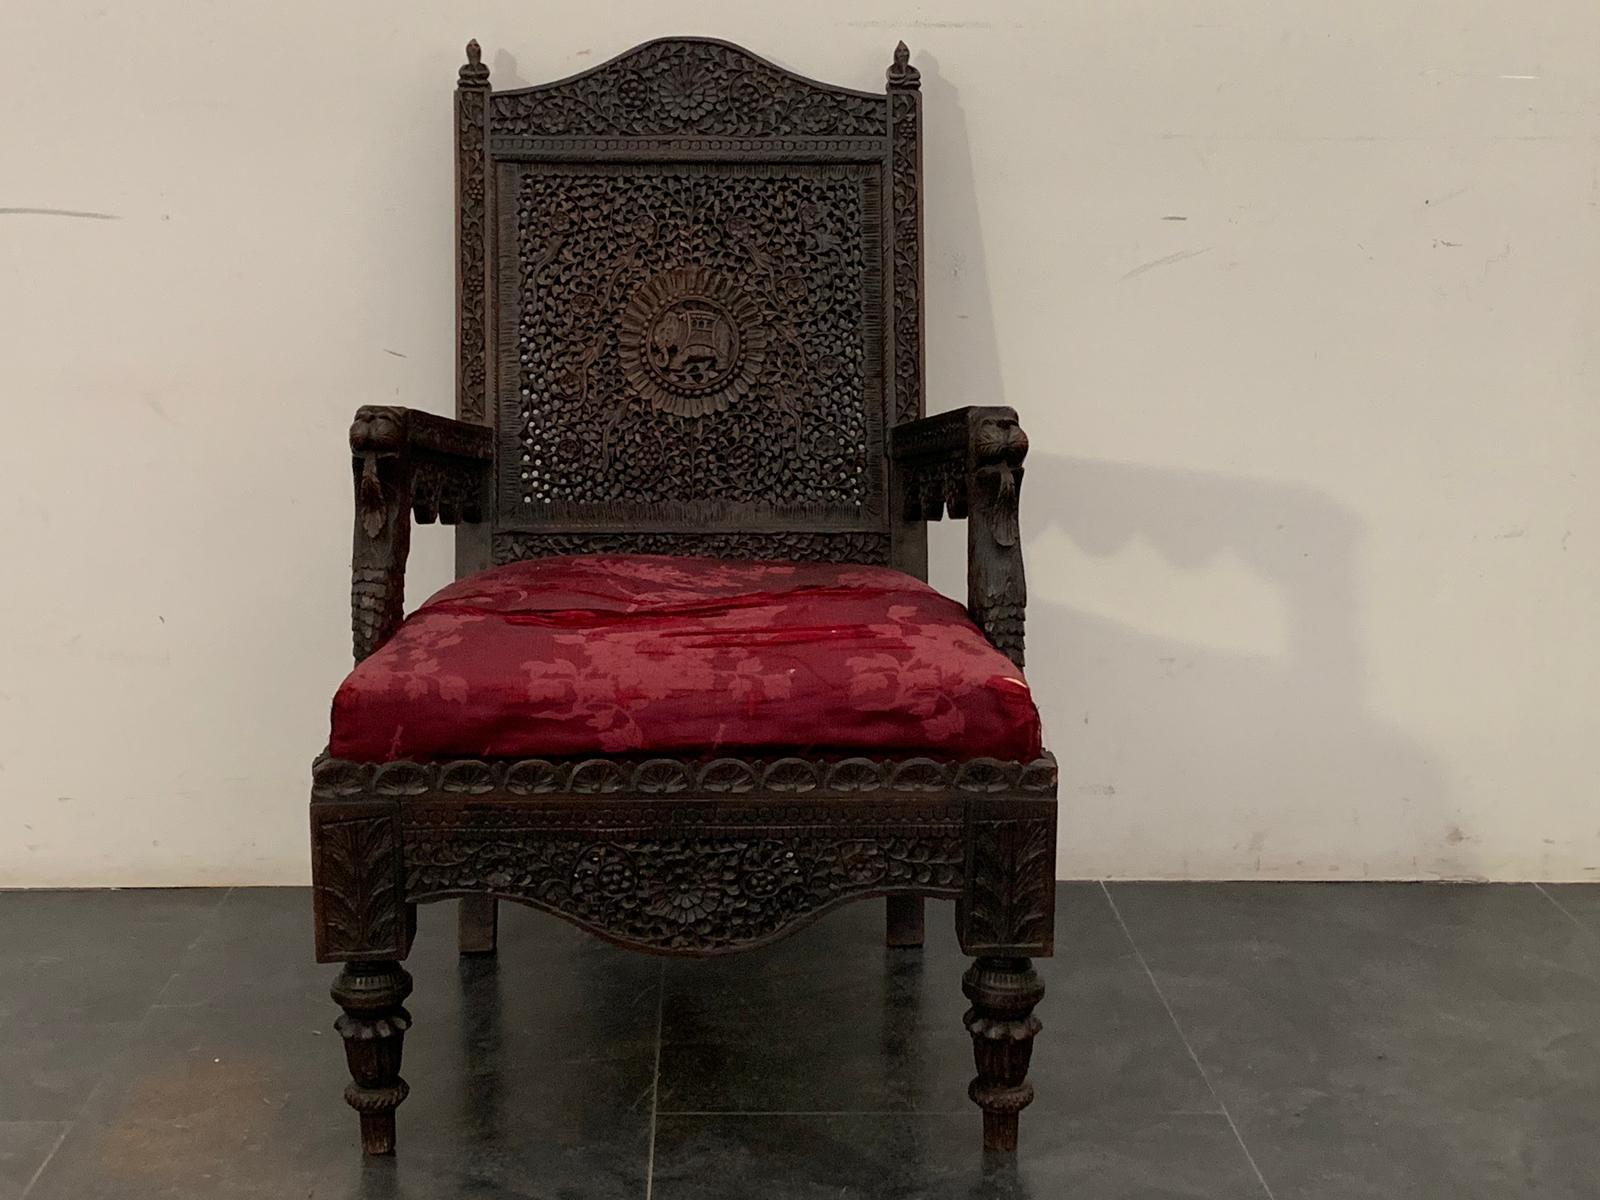 British Indian Ocean Territory
Anglo Indian colonial armchair, carved on teak wood, under the armrests stand out 2 lion heads, on the central rose window of the backrest is depicted an imperial elephant, on the back at the sides of the knobs the